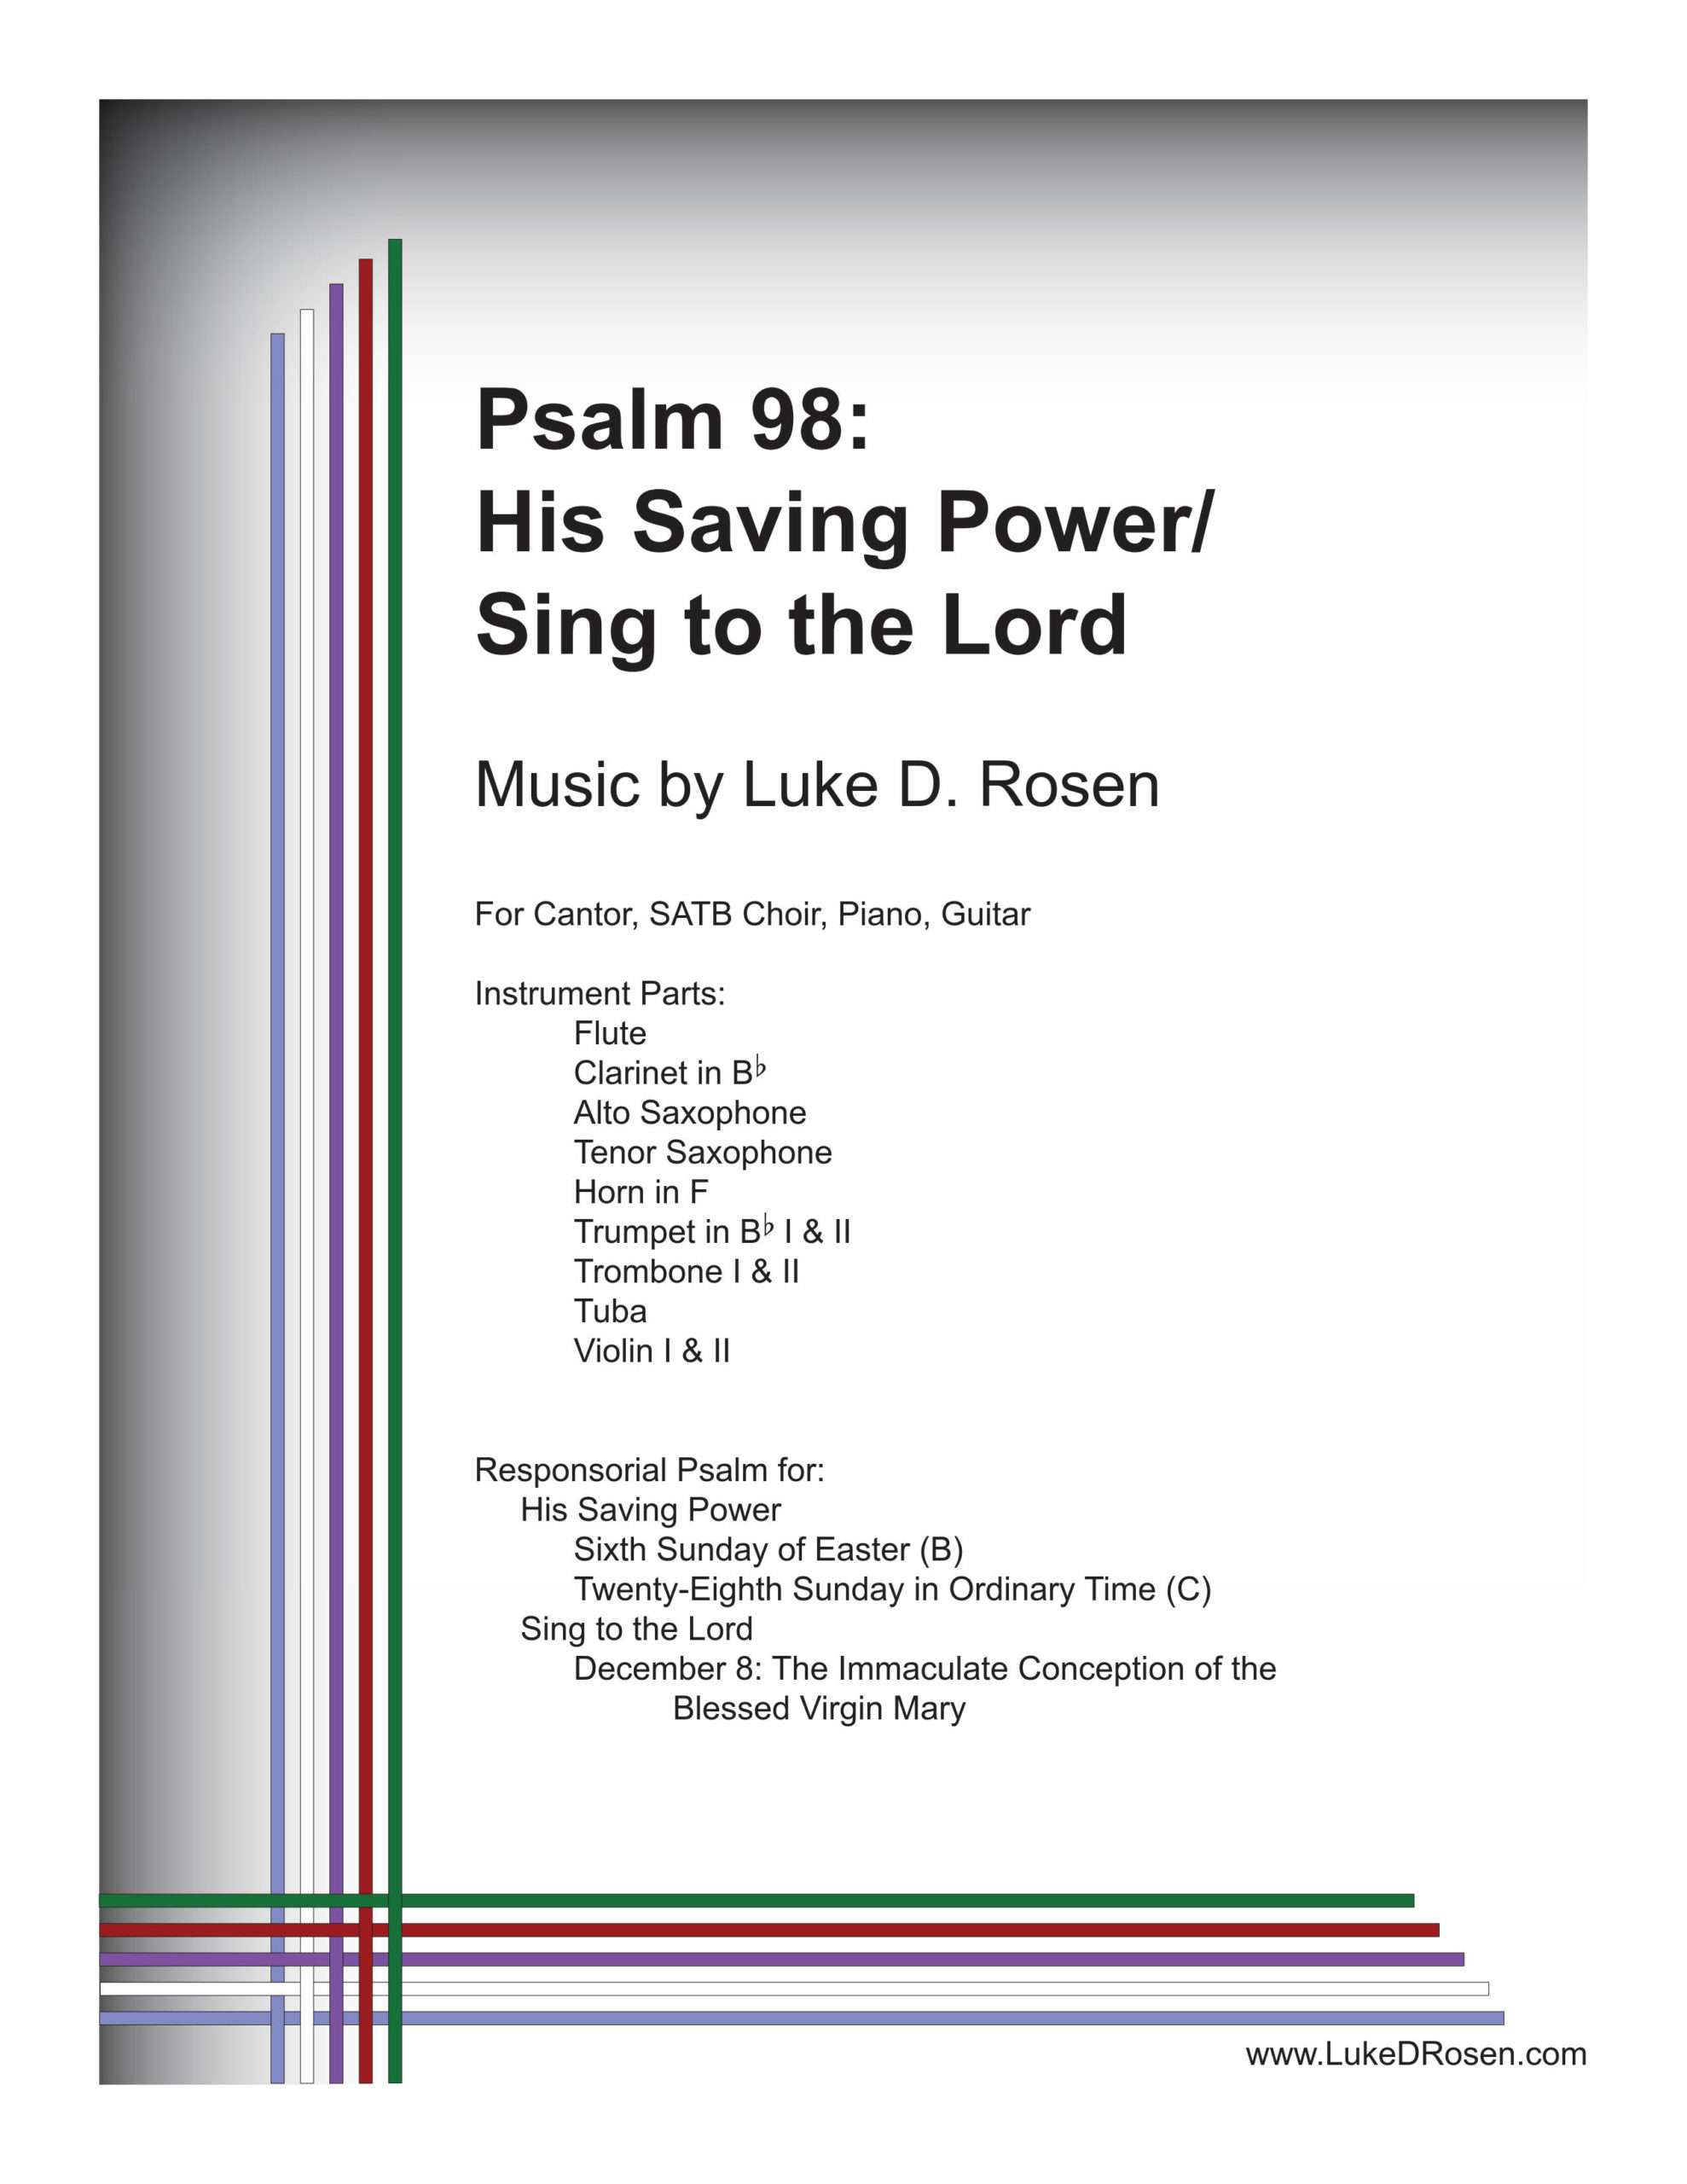 Psalm 98 – His Saving Power / Sing to the Lord (Rosen)